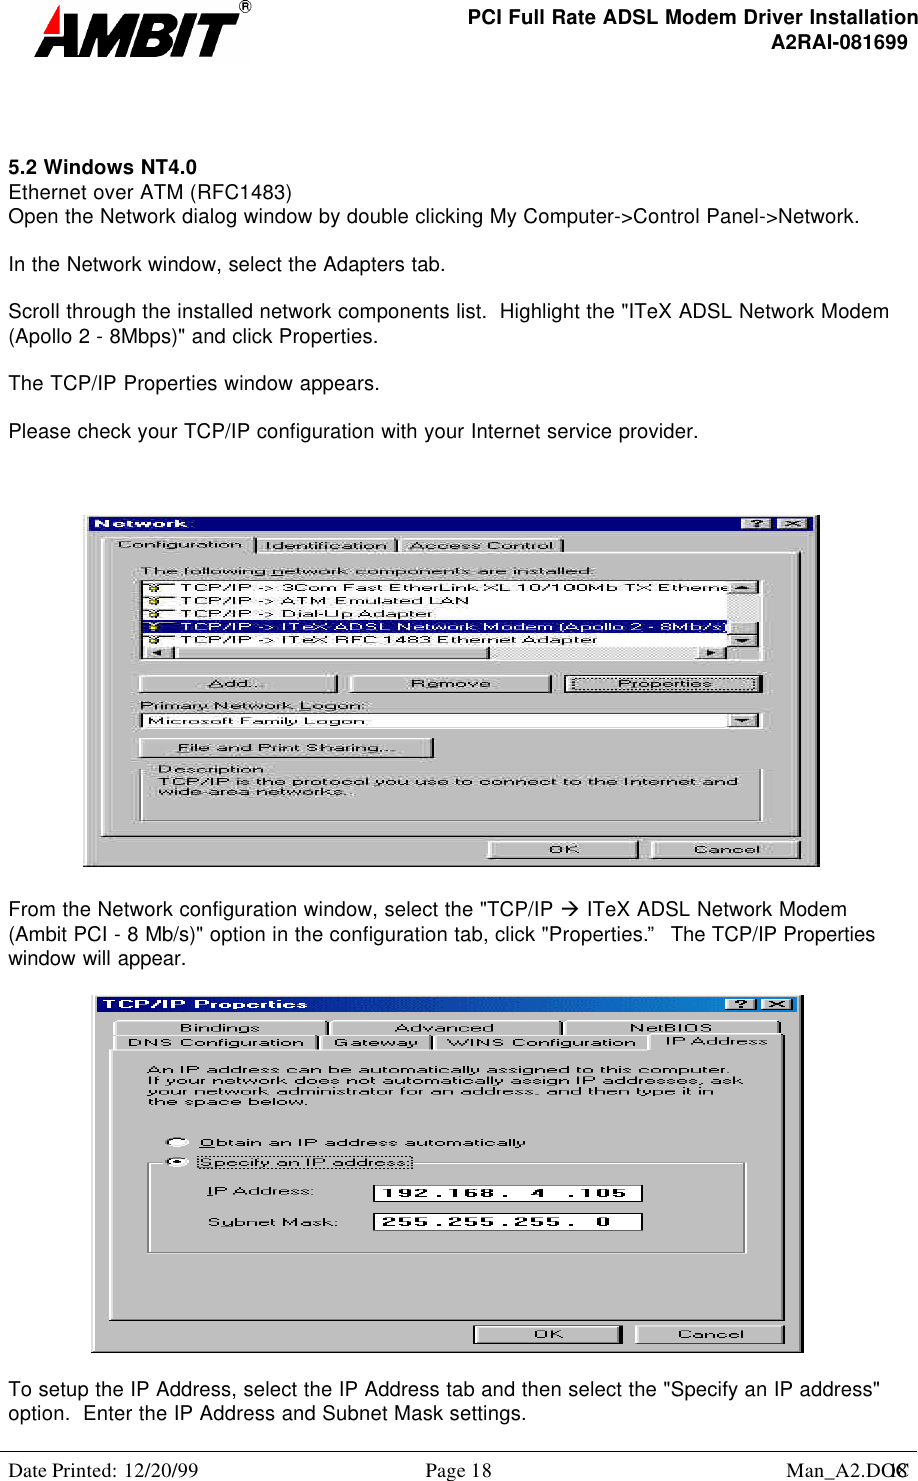 PCI Full Rate ADSL Modem Driver InstallationA2RAI-081699Date Printed: 12/20/99 Page 18 Man_A2.DOC185.2 Windows NT4.0Ethernet over ATM (RFC1483)Open the Network dialog window by double clicking My Computer-&gt;Control Panel-&gt;Network.In the Network window, select the Adapters tab.Scroll through the installed network components list.  Highlight the &quot;ITeX ADSL Network Modem(Apollo 2 - 8Mbps)&quot; and click Properties.The TCP/IP Properties window appears.Please check your TCP/IP configuration with your Internet service provider.From the Network configuration window, select the &quot;TCP/IP à ITeX ADSL Network Modem(Ambit PCI - 8 Mb/s)&quot; option in the configuration tab, click &quot;Properties.”  The TCP/IP Propertieswindow will appear.To setup the IP Address, select the IP Address tab and then select the &quot;Specify an IP address&quot;option.  Enter the IP Address and Subnet Mask settings.